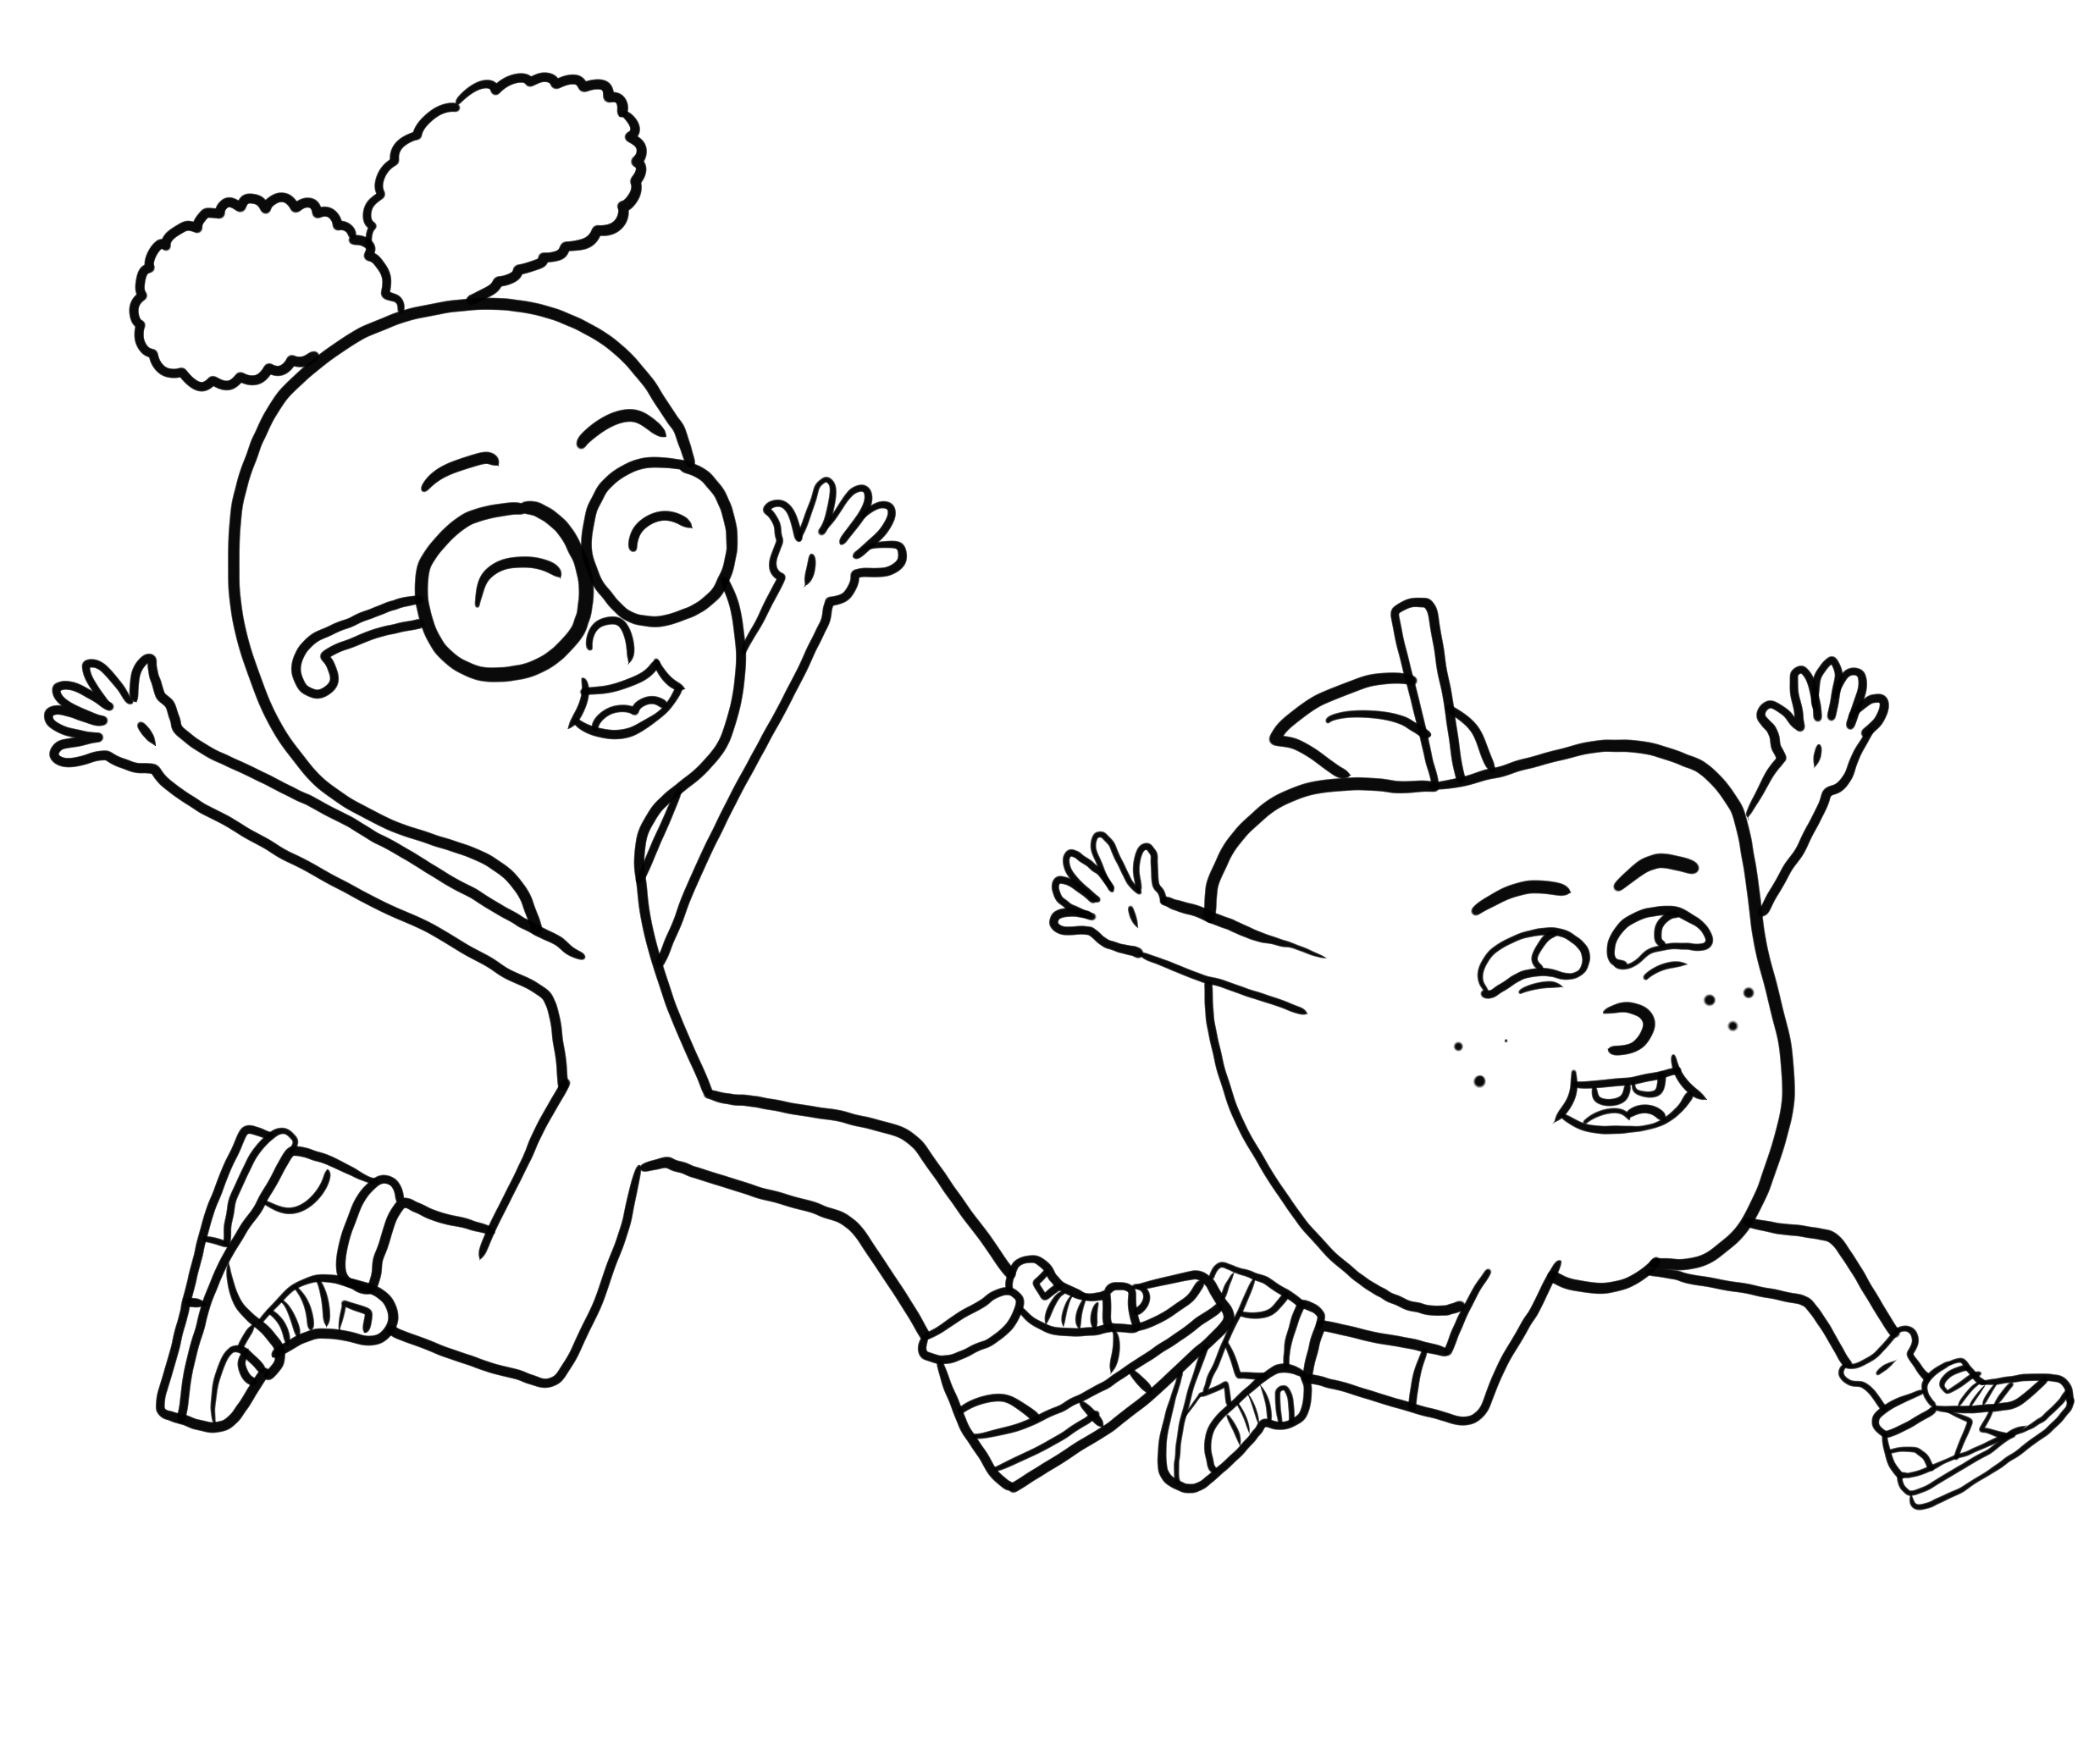 Apple & Onion 05 from Apple & Onion coloring page to print and coloring